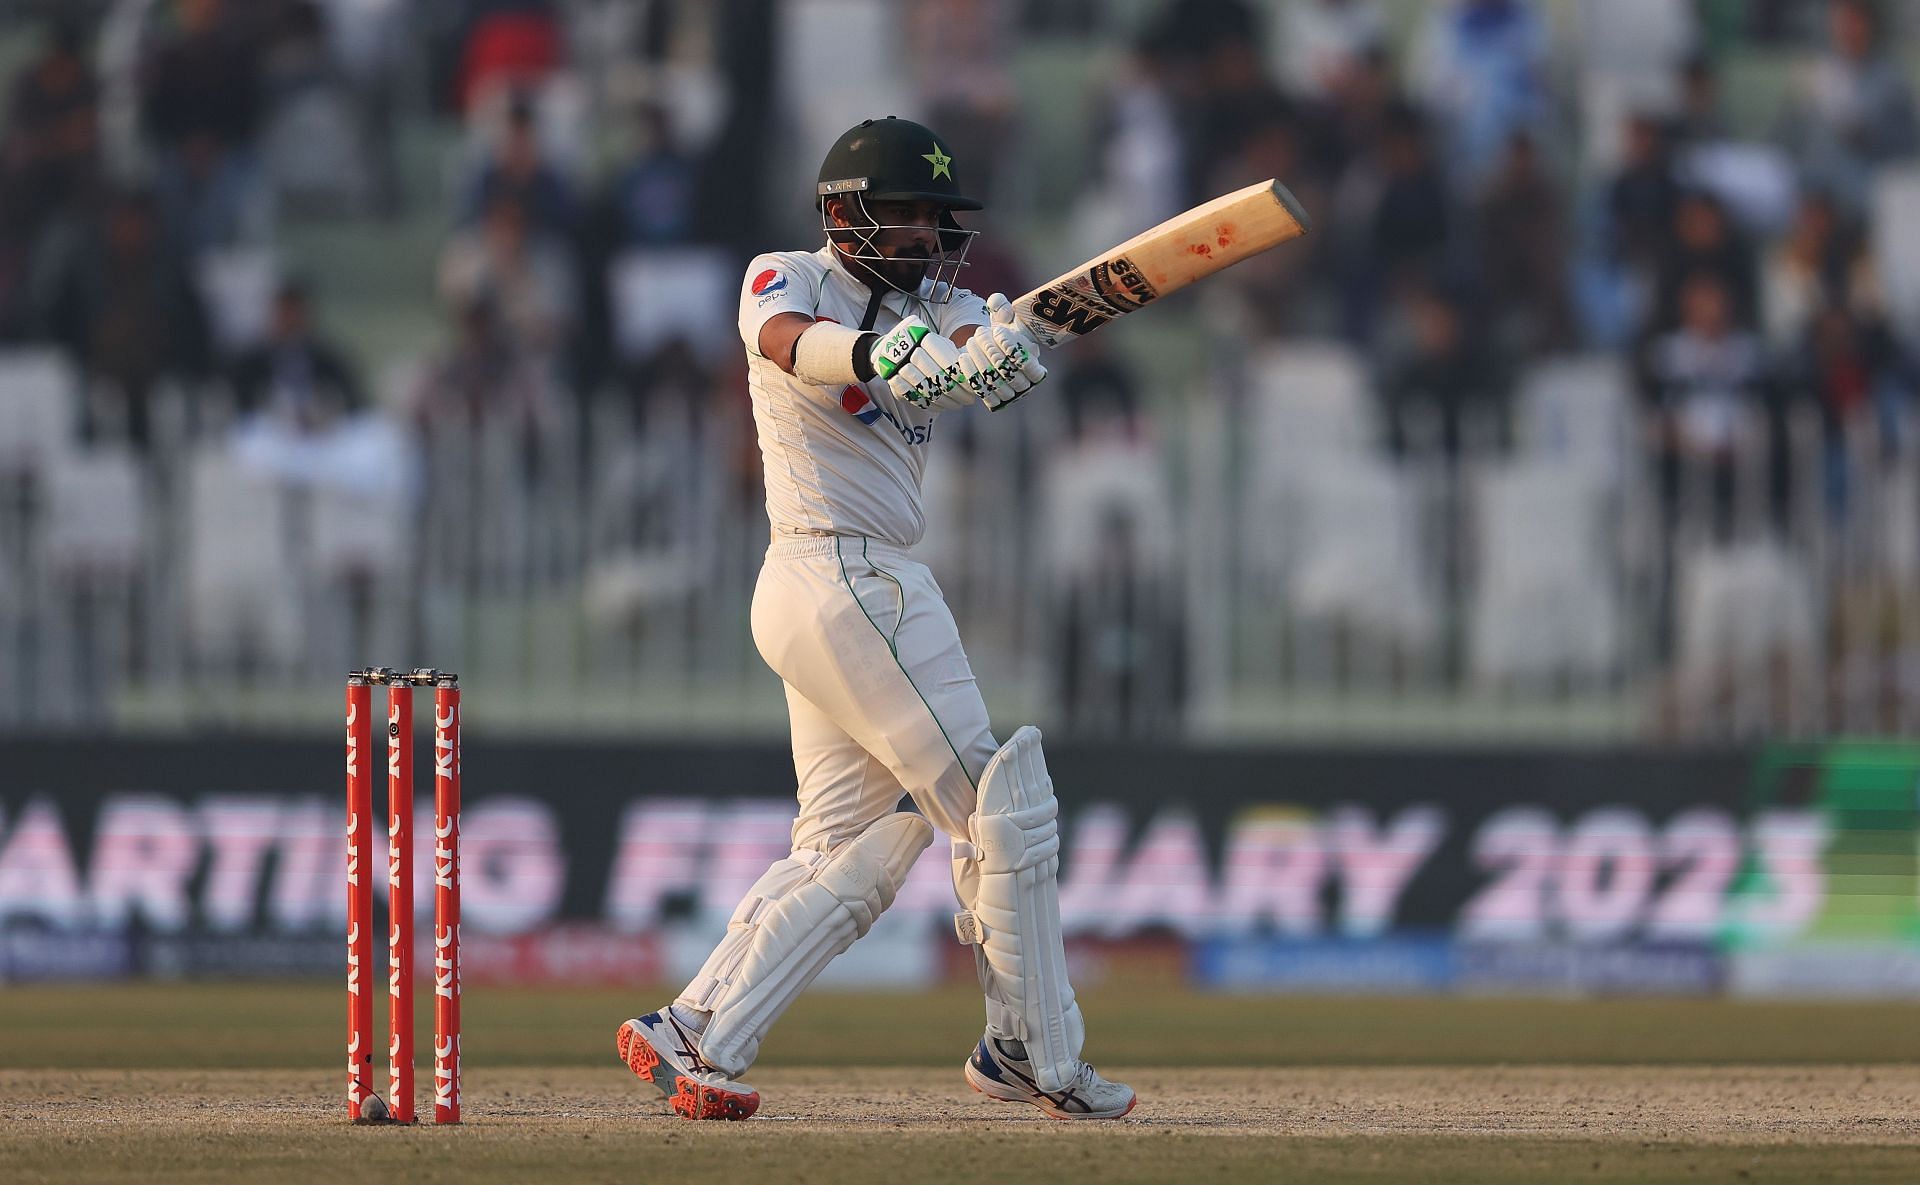 Pakistan v England - First Test Match: Day Four (Image: Getty)